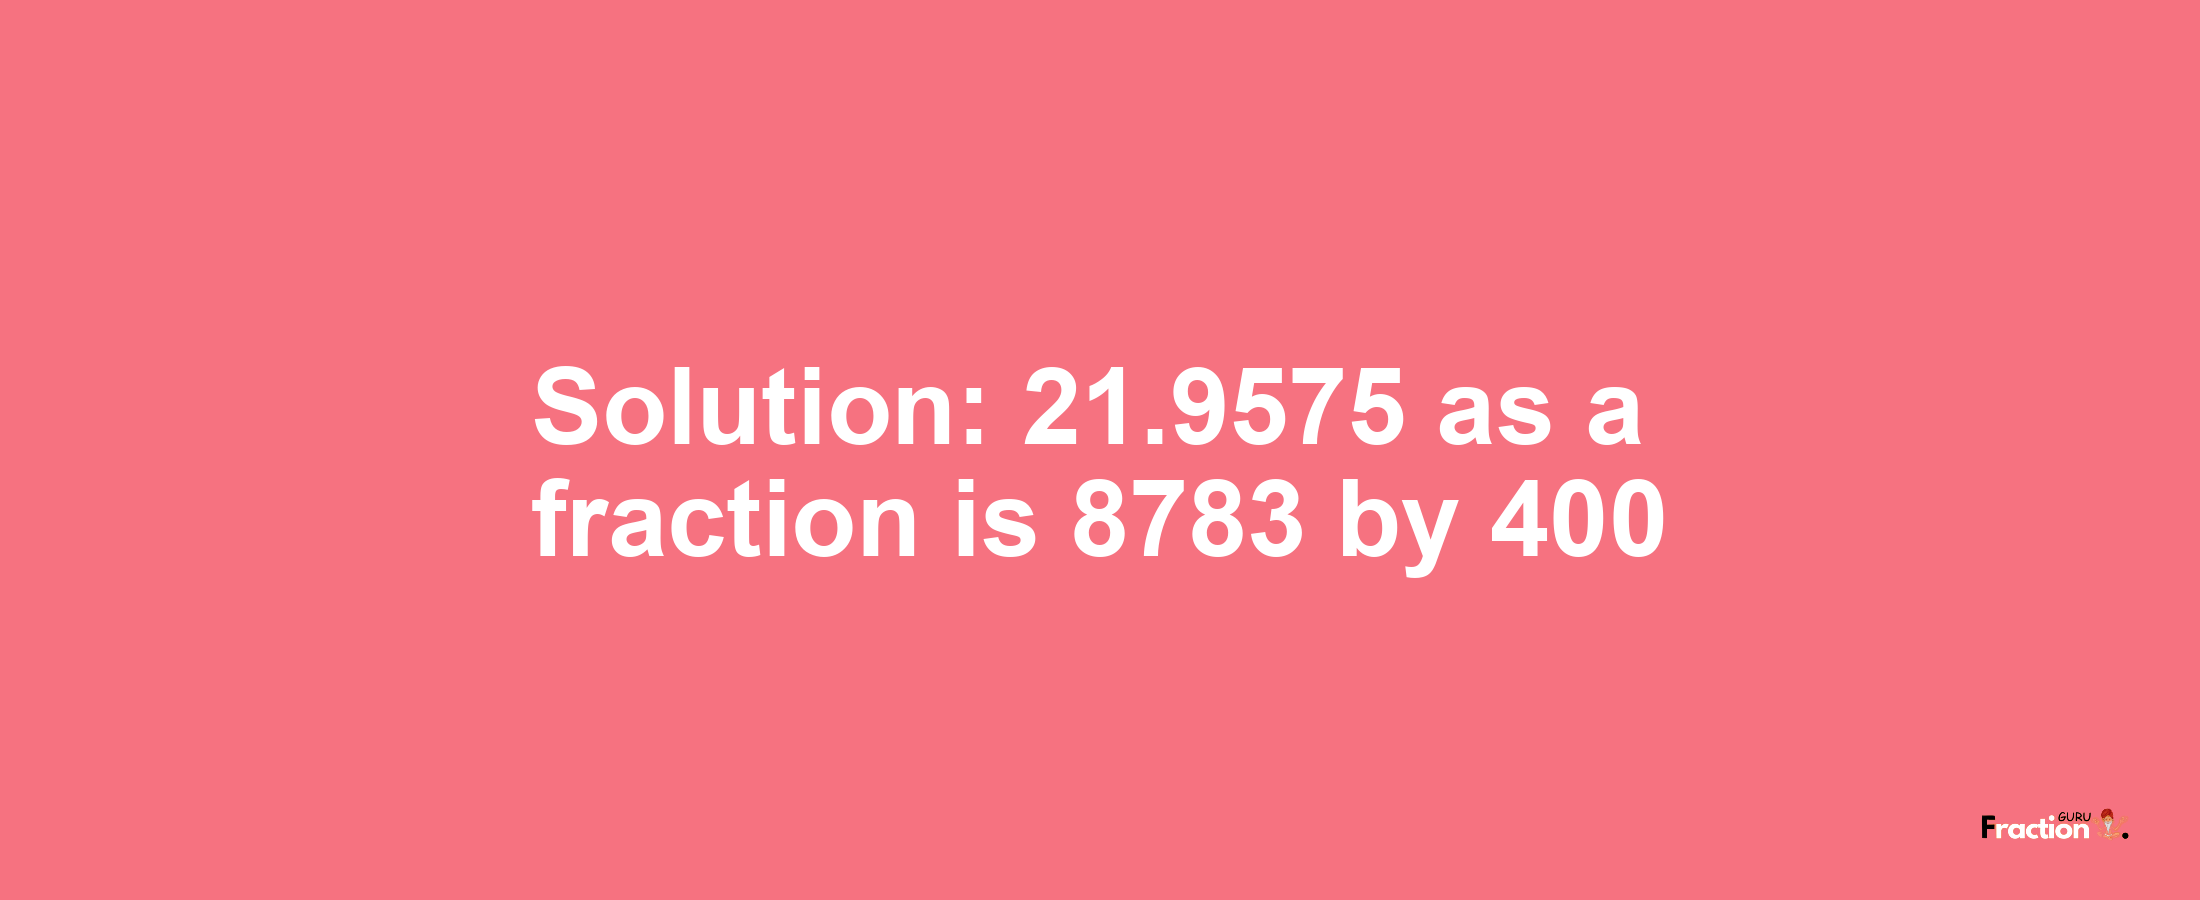 Solution:21.9575 as a fraction is 8783/400